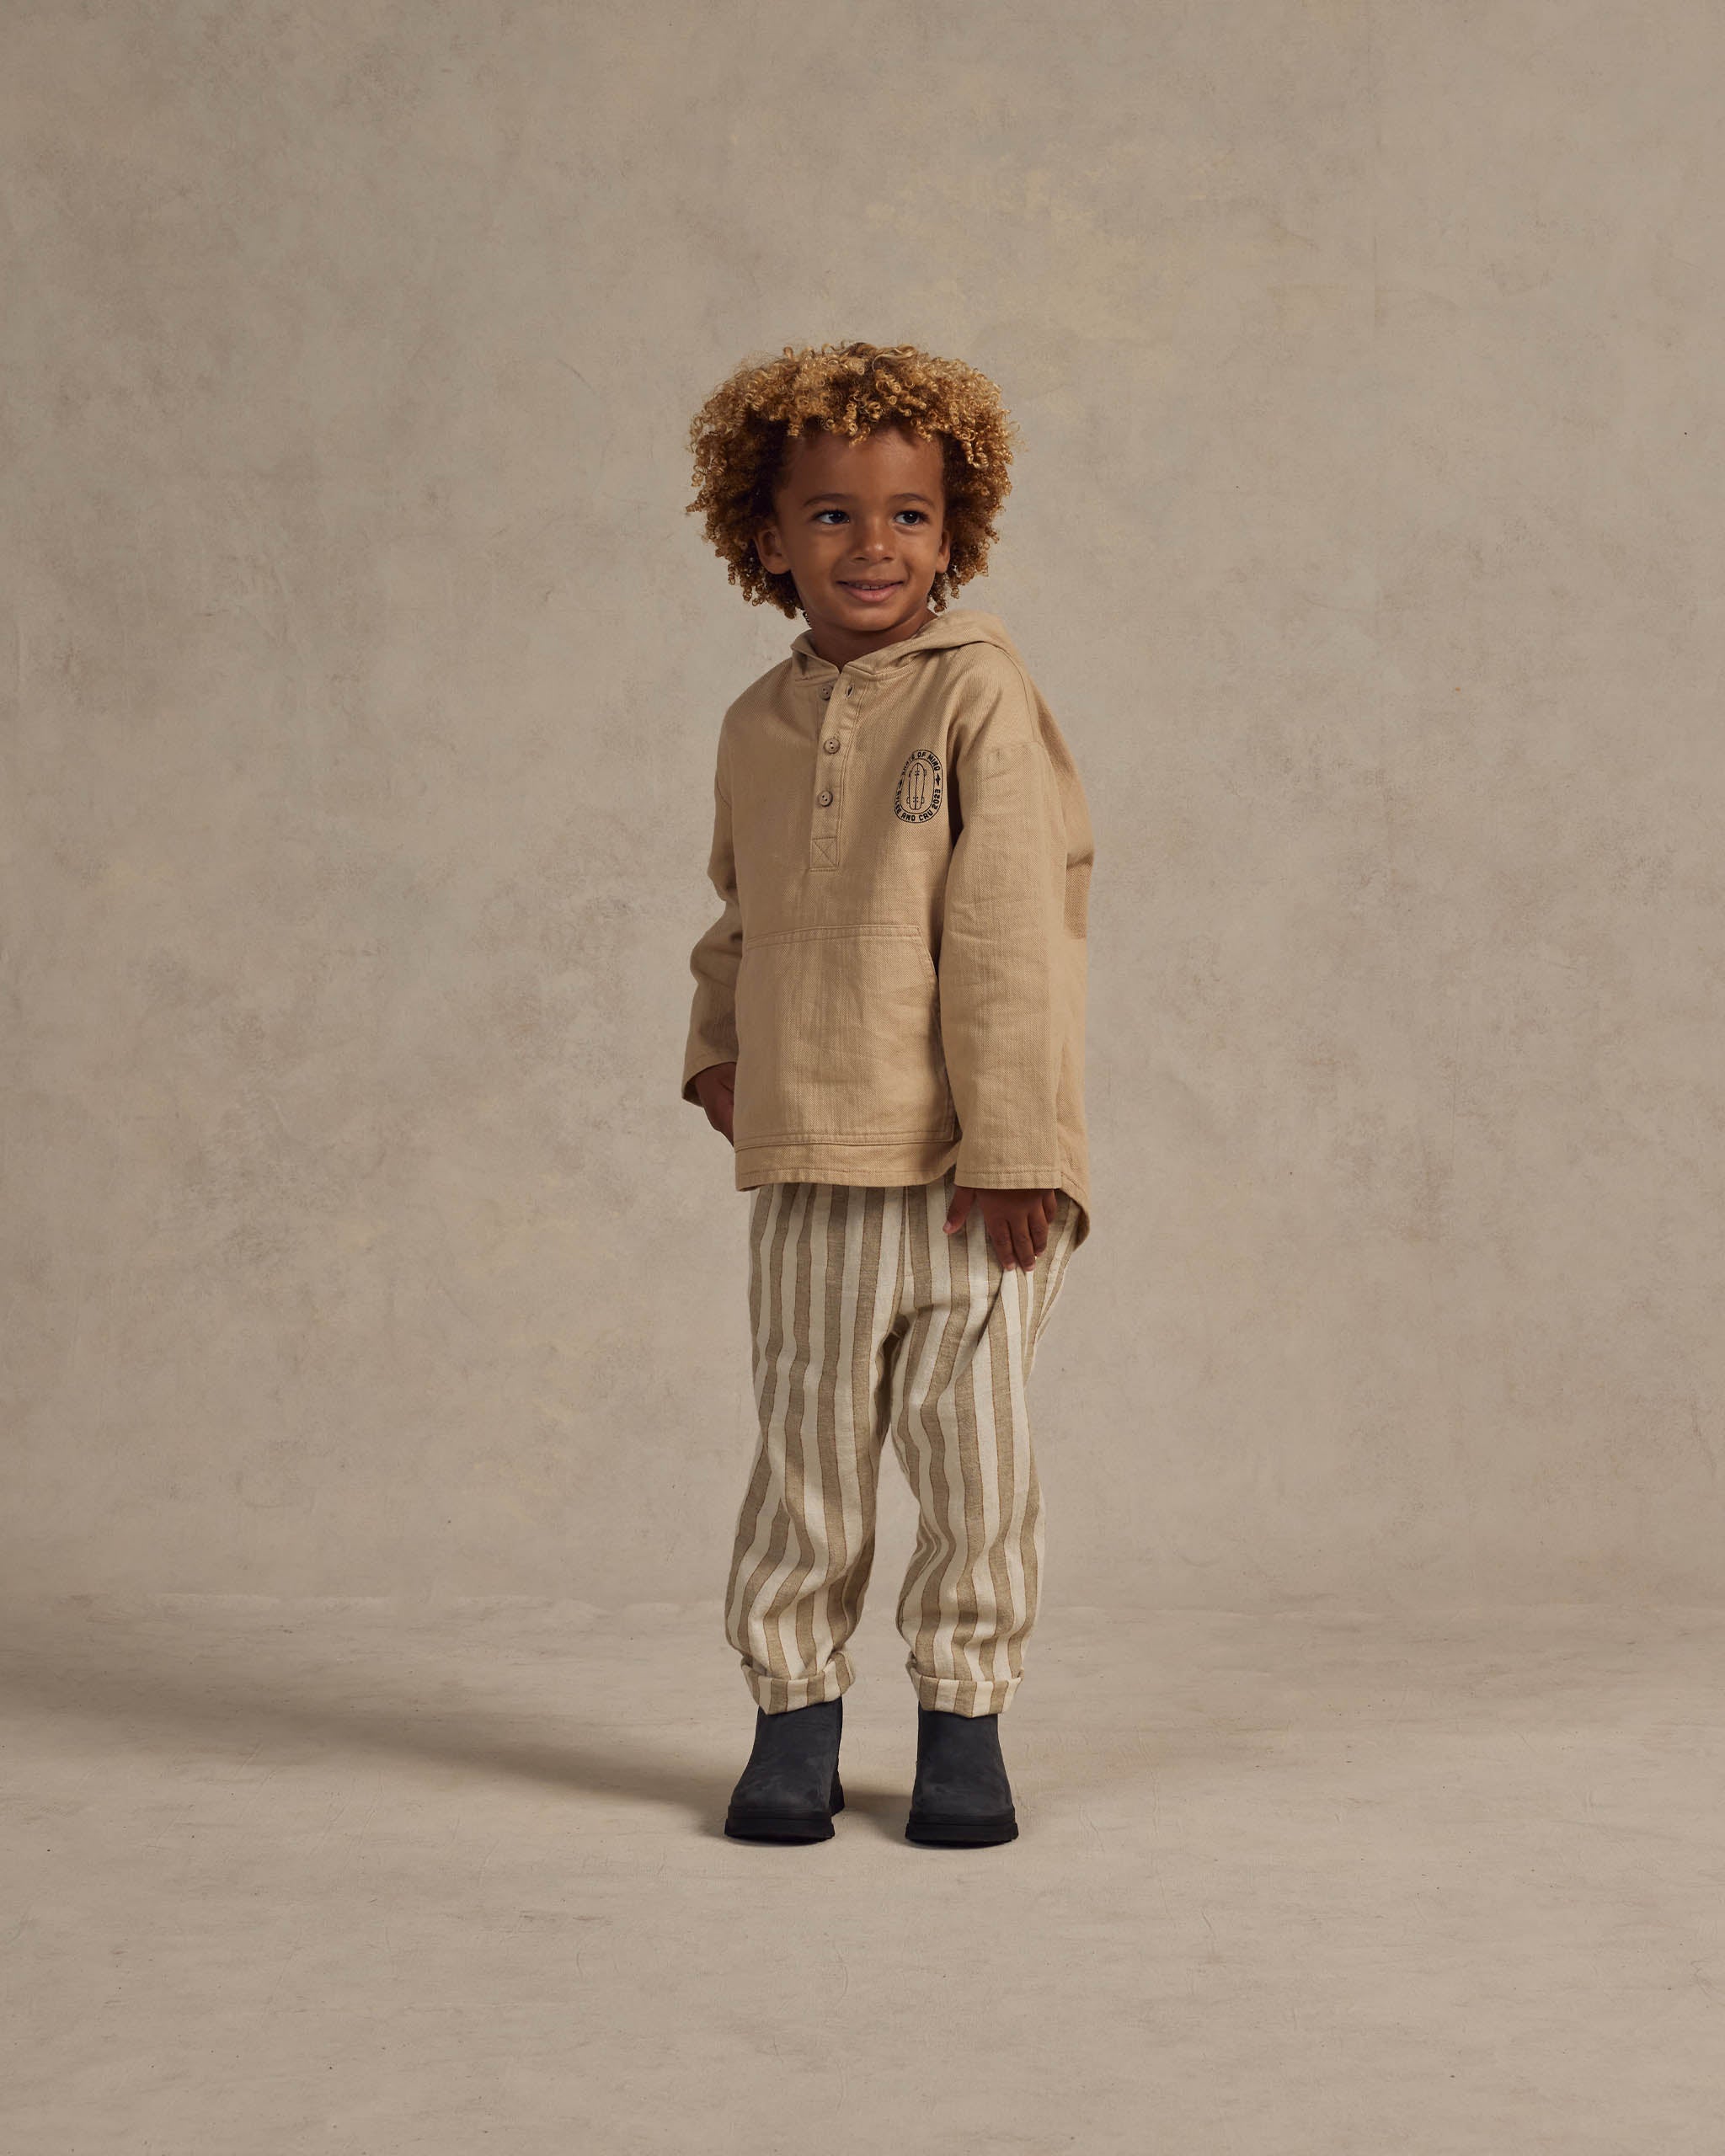 Ethan Trouser || Autumn Stripe - Rylee + Cru | Kids Clothes | Trendy Baby Clothes | Modern Infant Outfits |